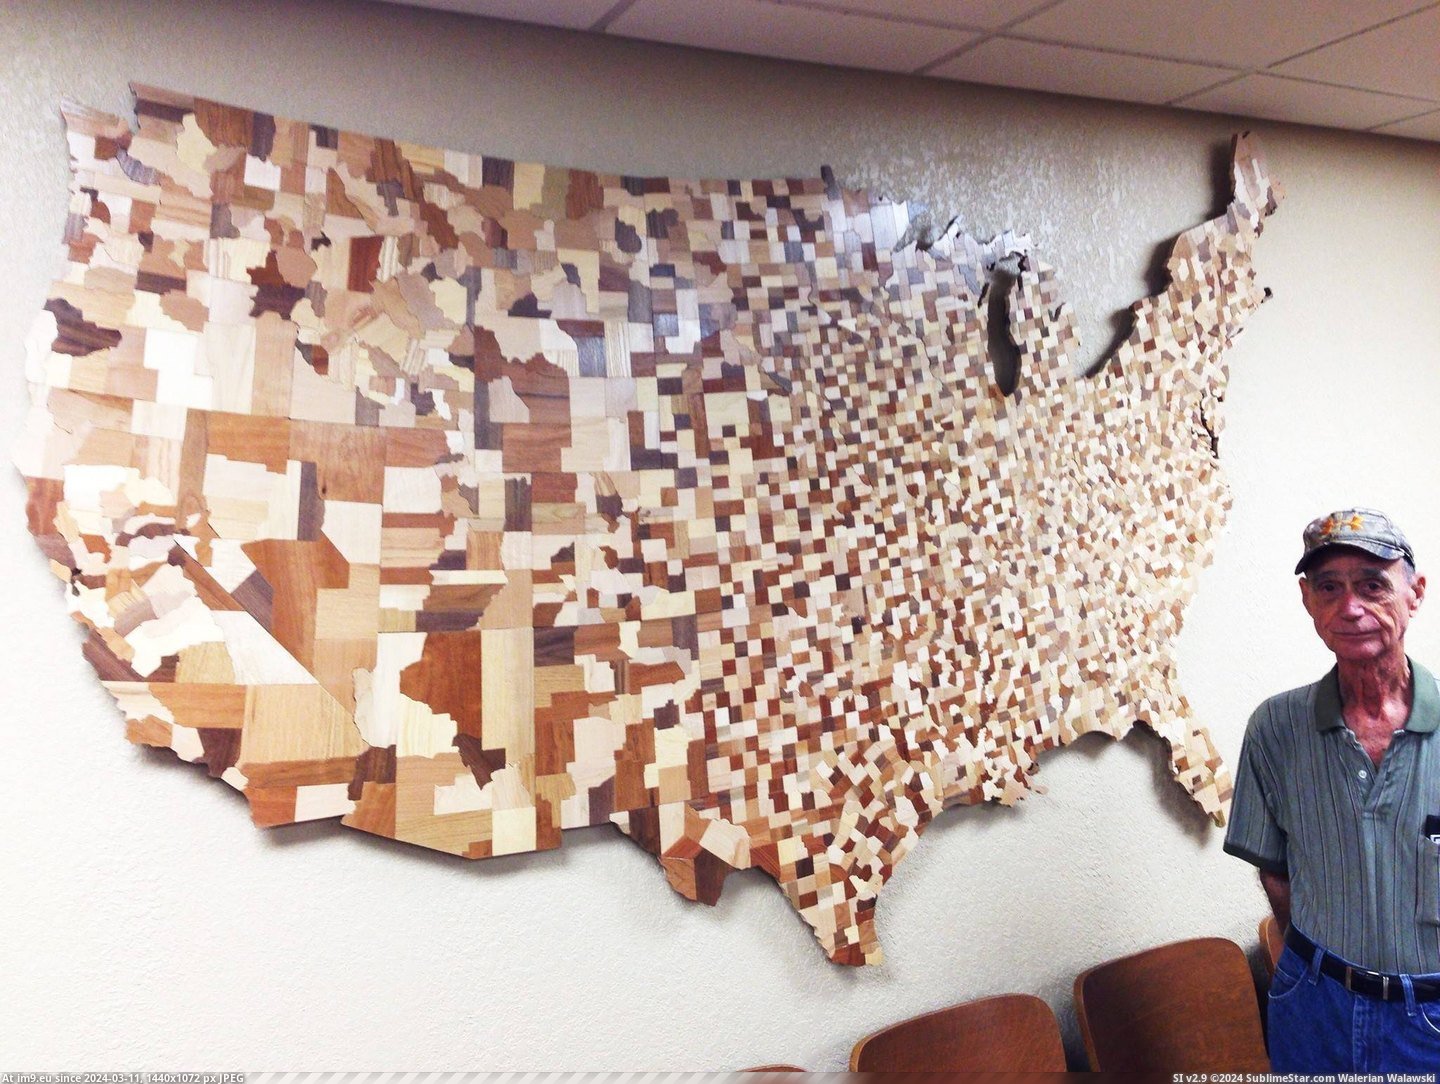 [Mapporn] USA counties map made from 3047 carved wooden blocks [2048x1536] (in My r/MAPS favs)